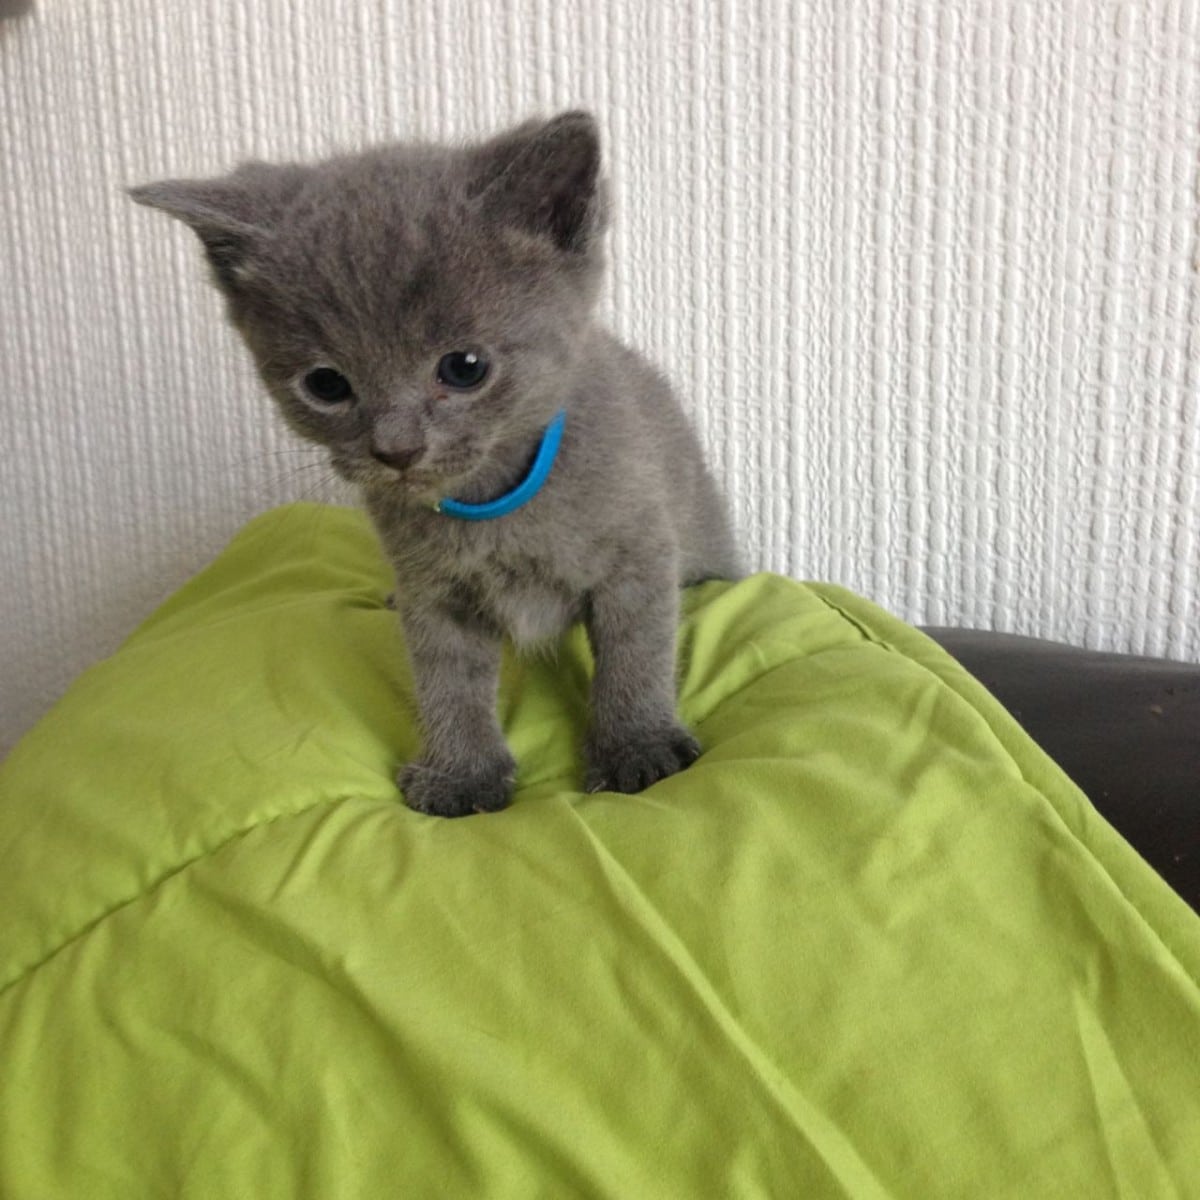 Russian Blue Cats For Sale